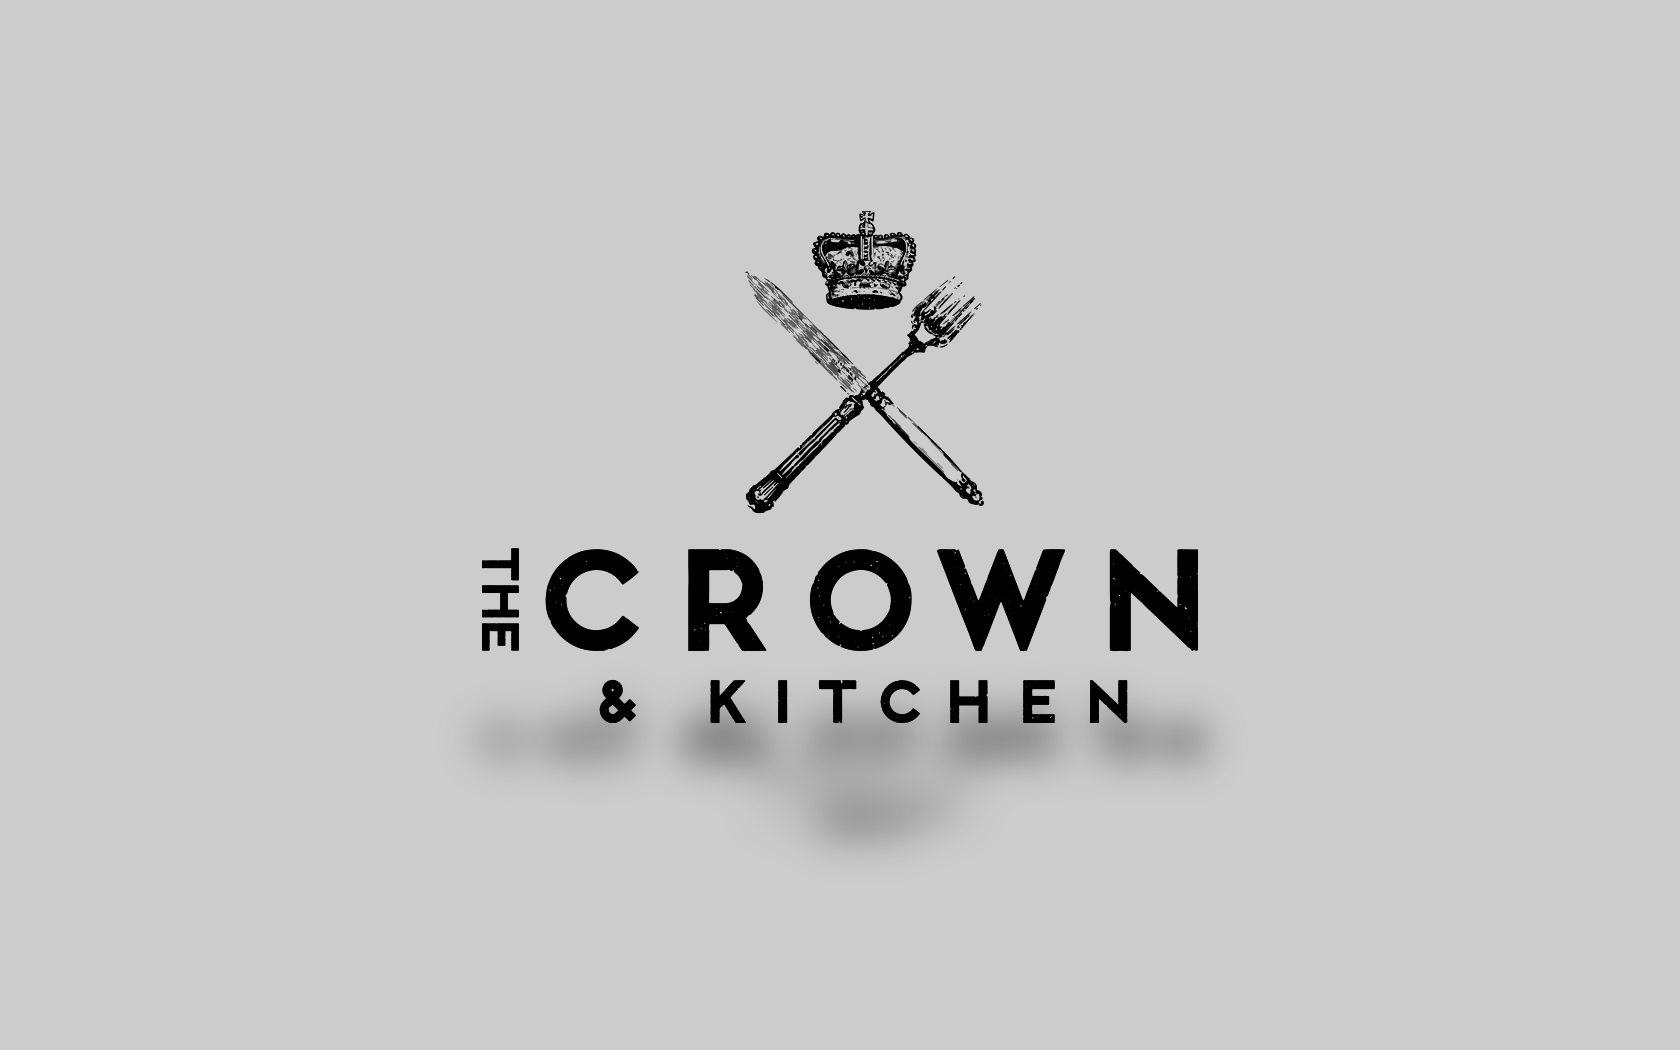 Crown and kitchen